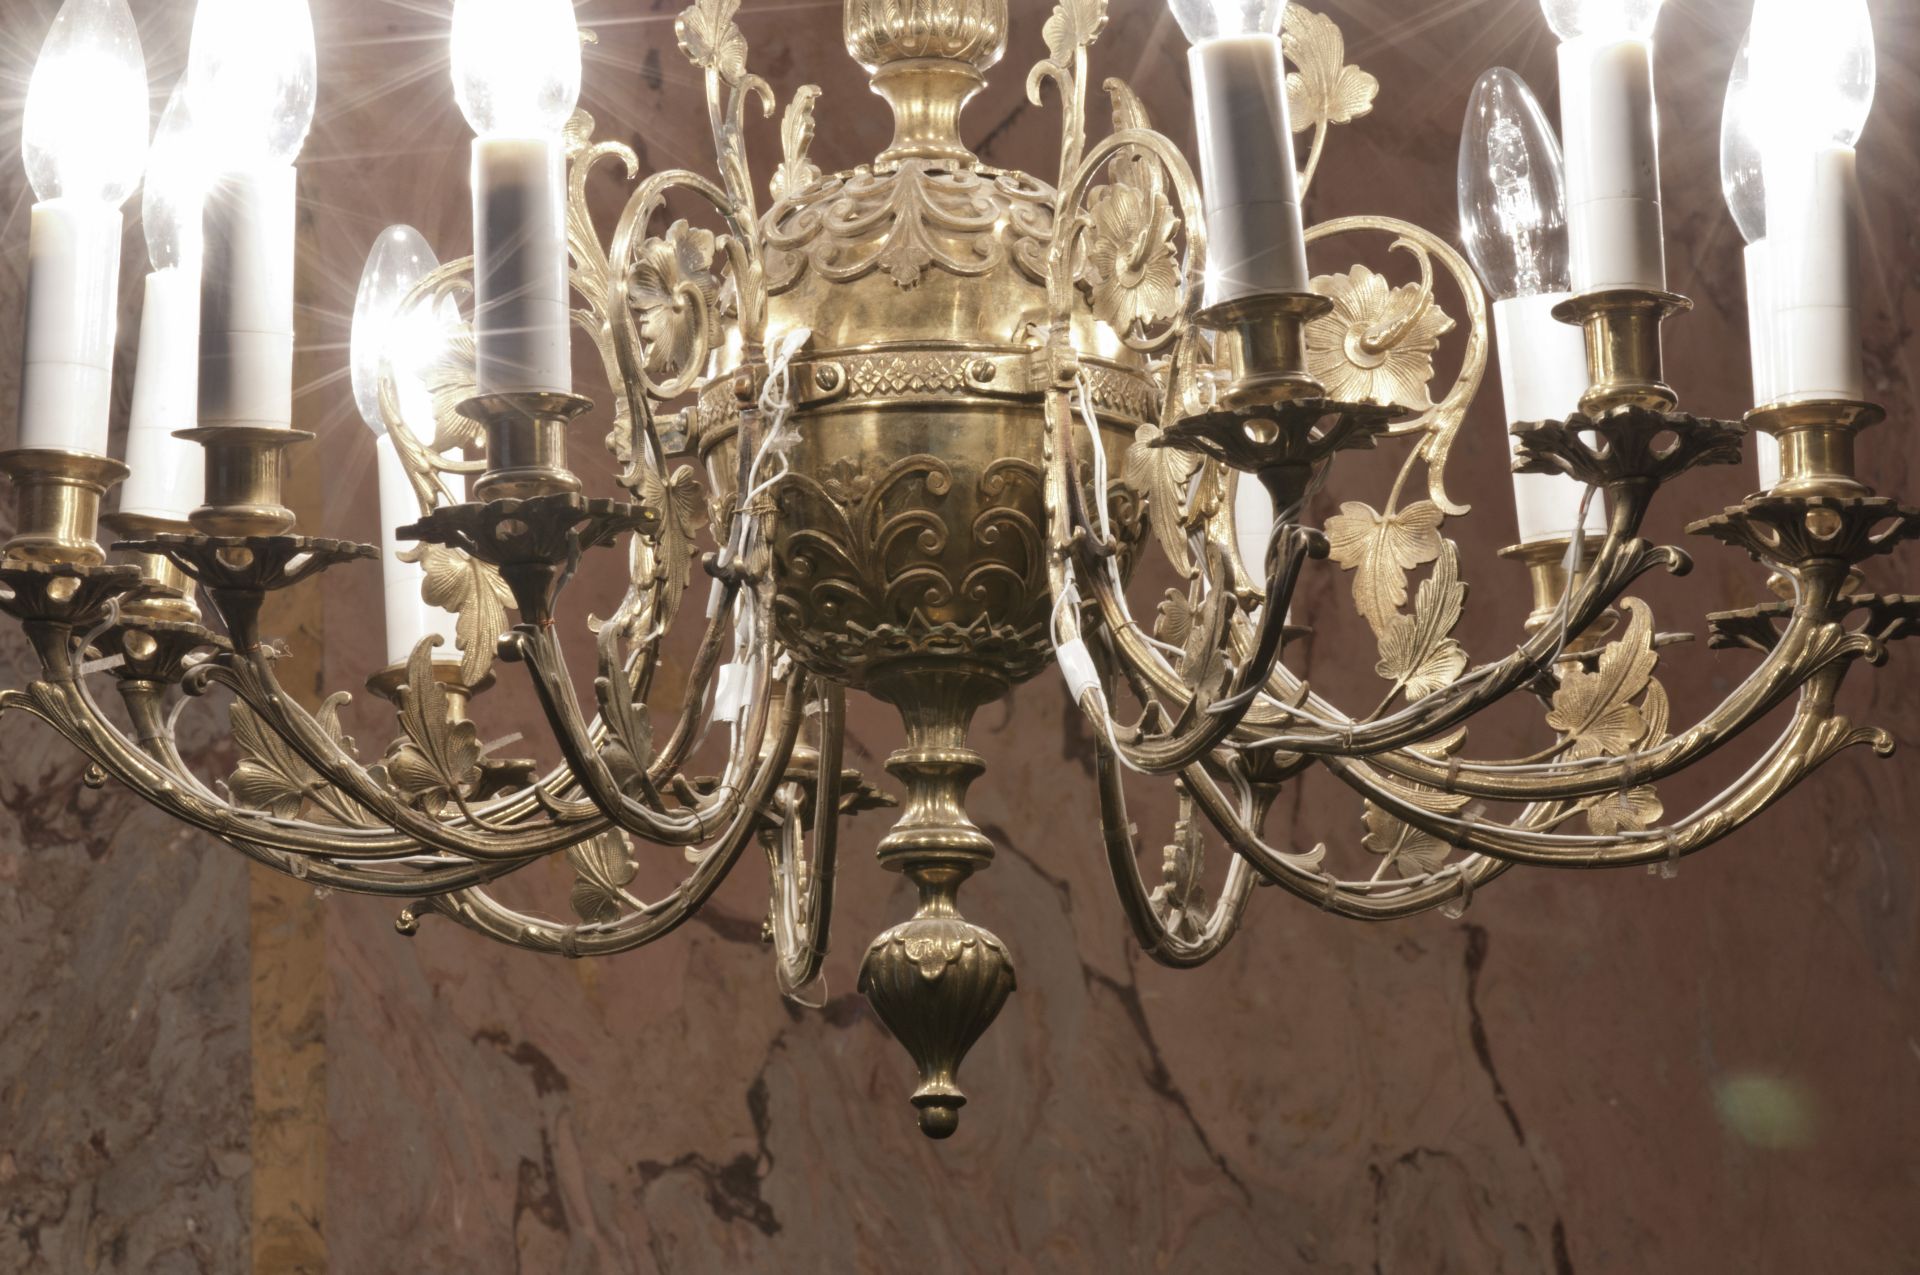 Fragment of chandelier, 1887–1925, Lithuanian National Museum of Art, TM-2591. Photo by Paulius Makauskas, 2017